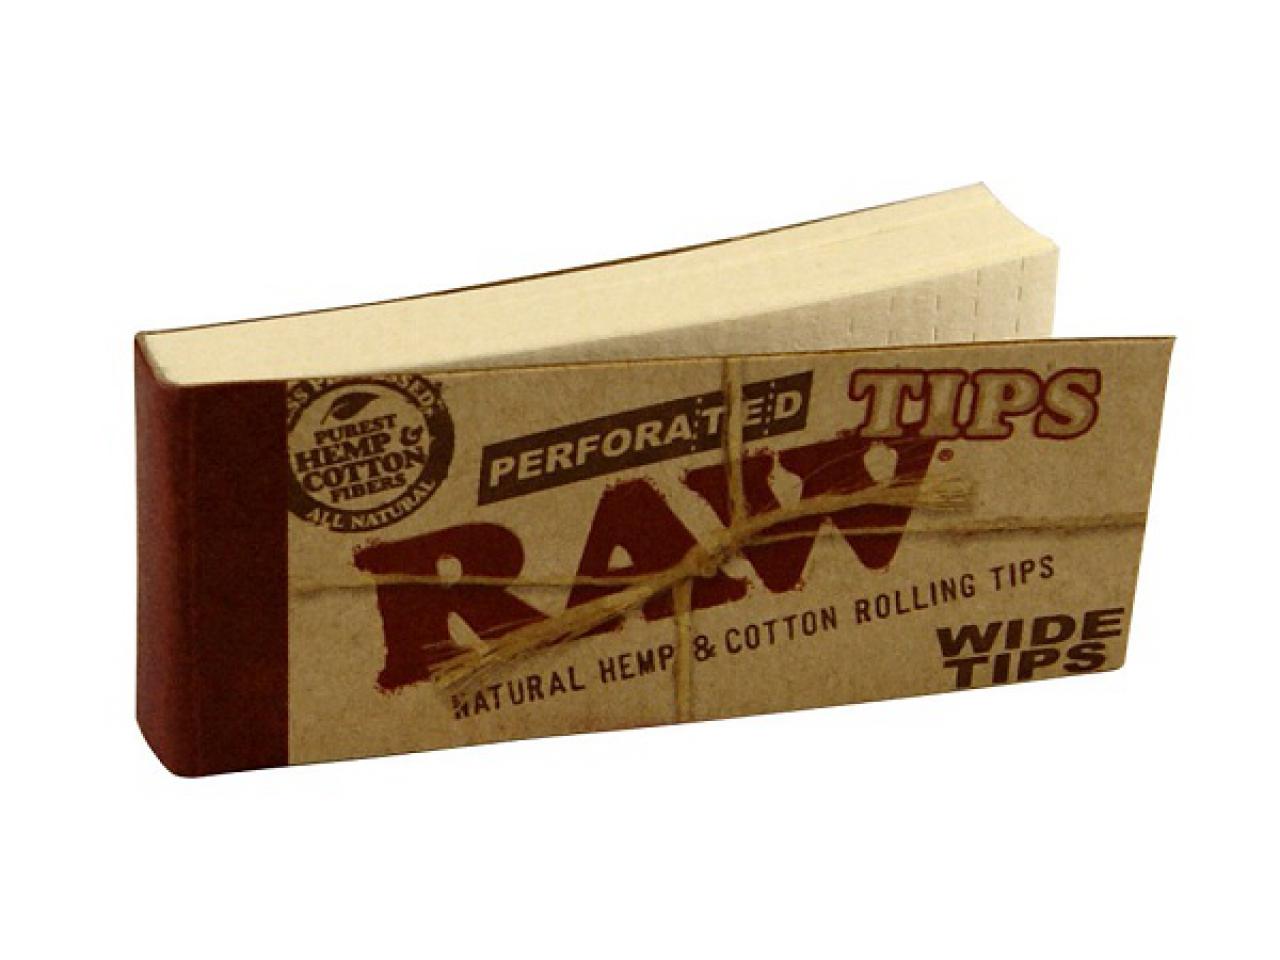 RAW papers | TIPS Wide perforiert Natural Hemp & Cotton